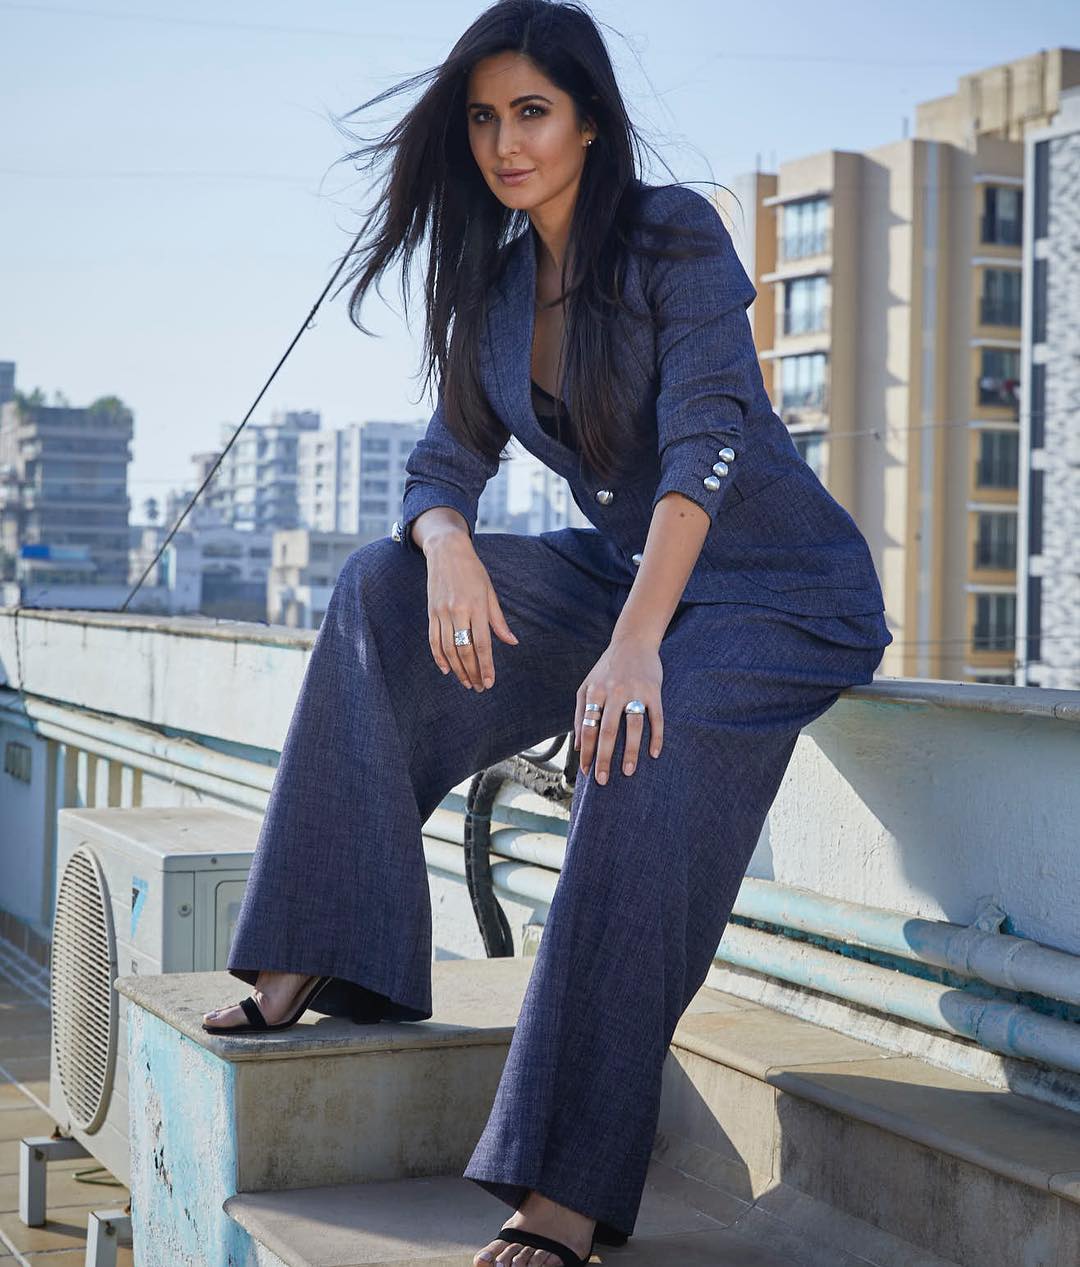 Tara Sutaria or Katrina Kaif: Which actress won your heart in pant suit style? 11153